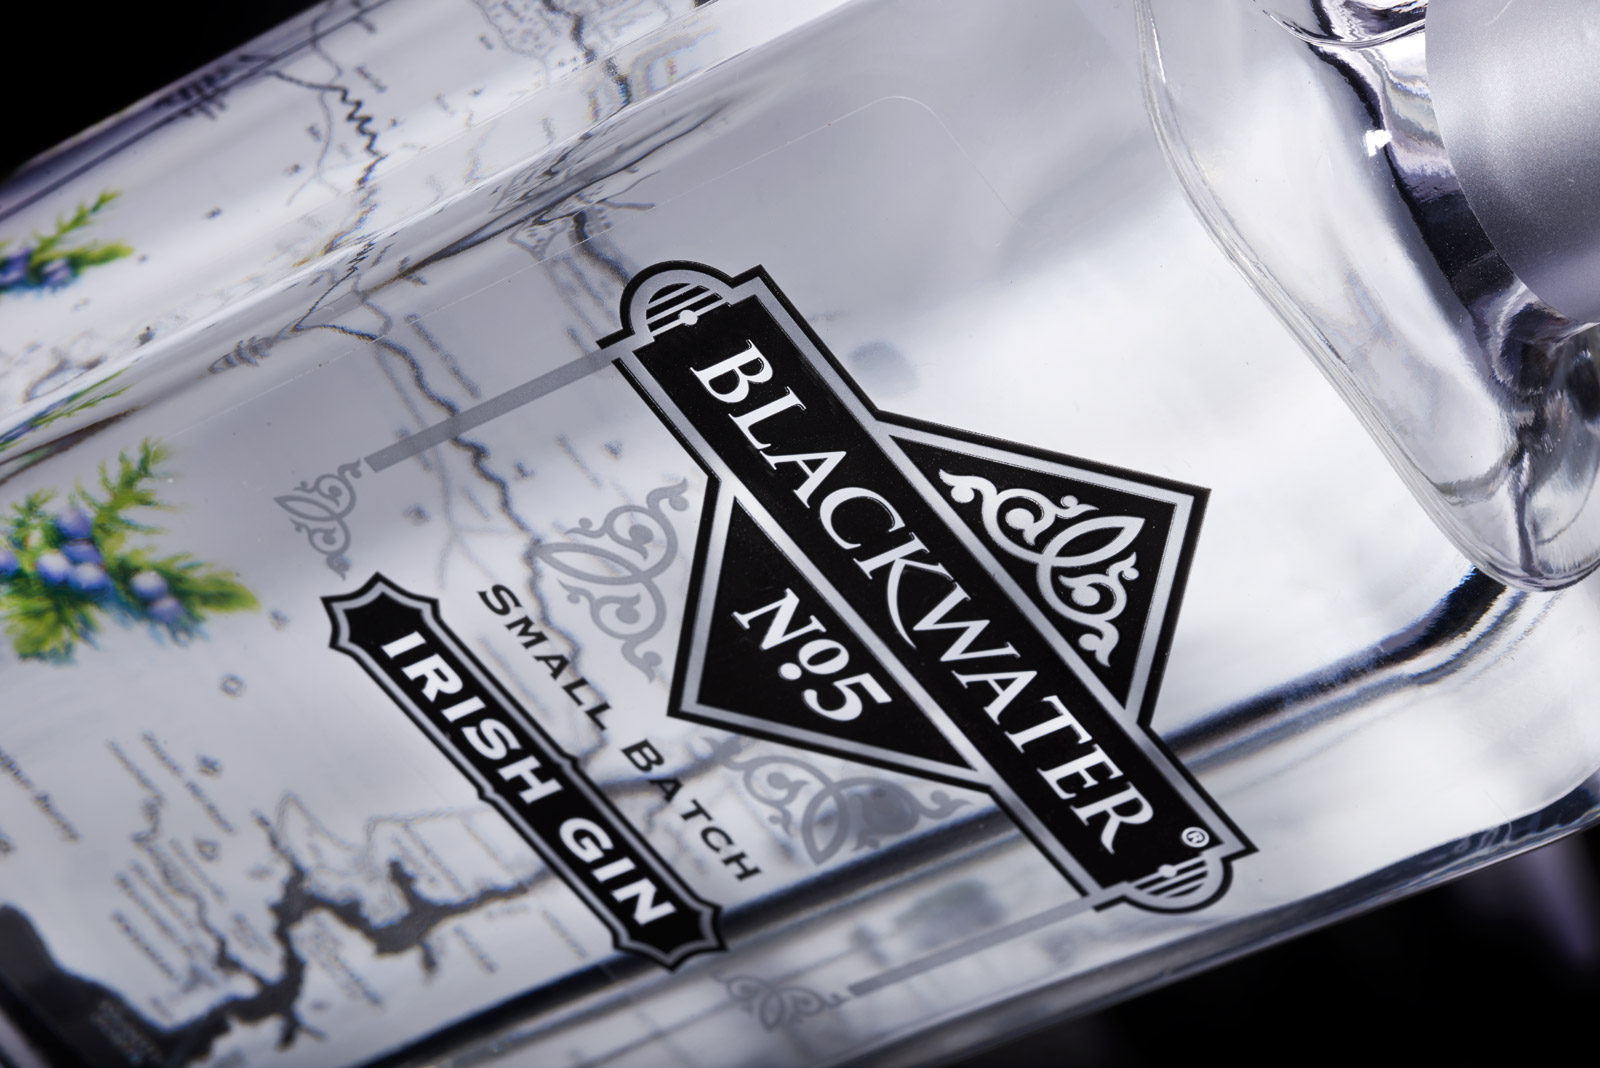 Blackwater No5 Gin - awarded a Gold Medal at the International Wine and Spirits Competition.